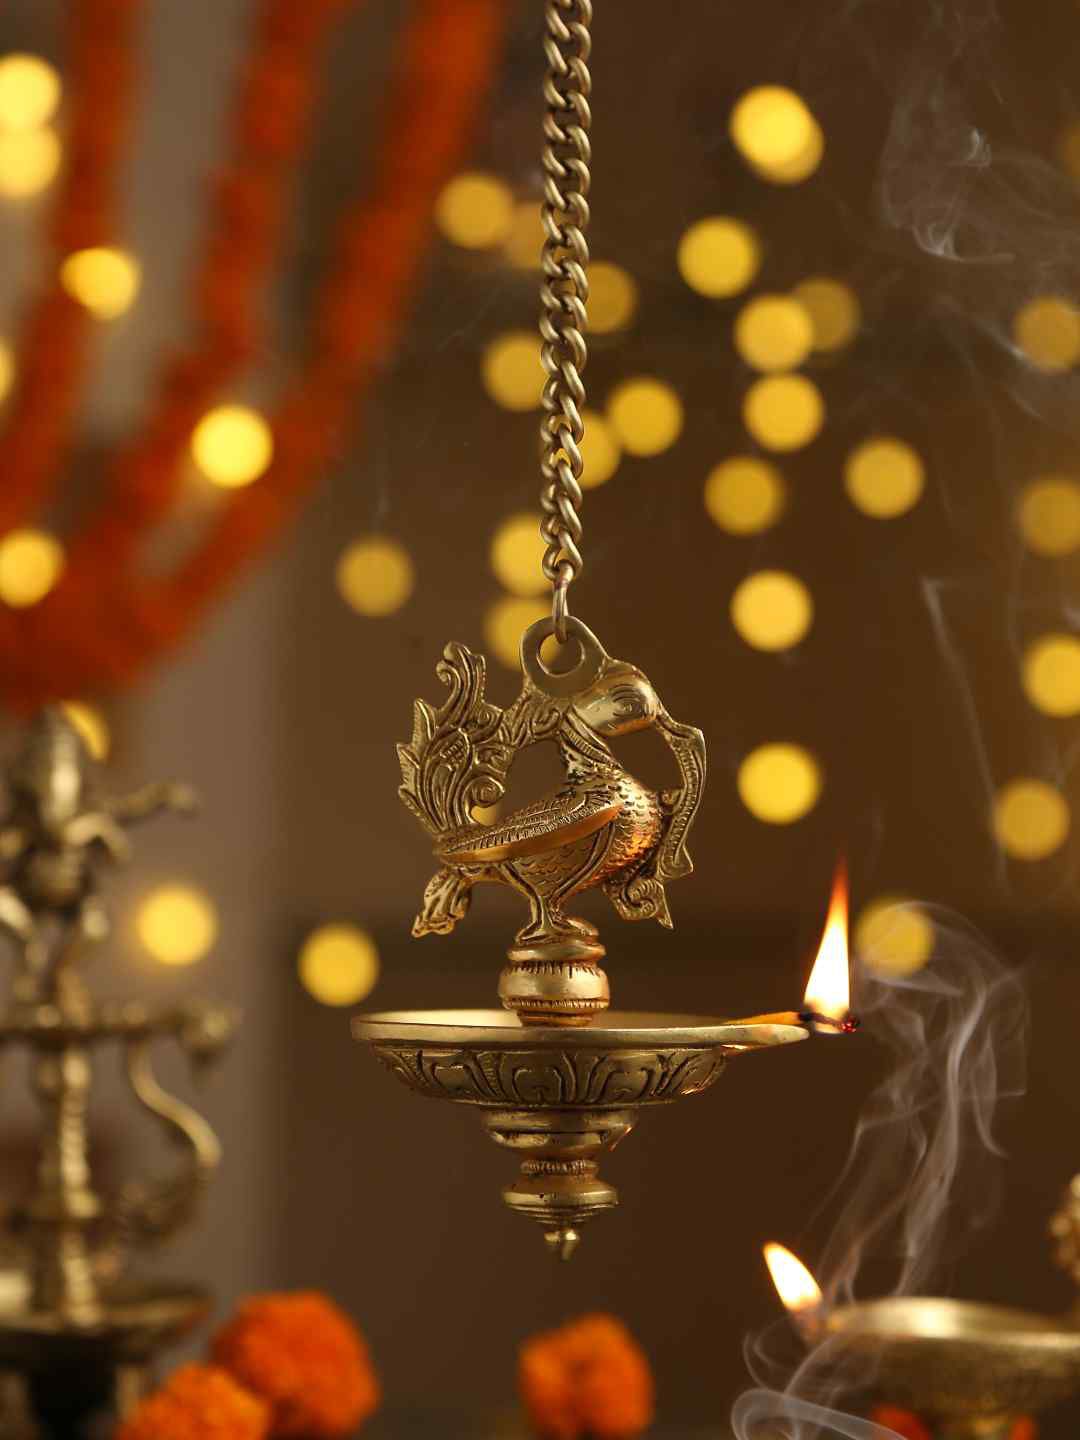 Amoliconcepts Gold-Toned Solid Brass Peacock Hanging Diya With Chain Price in India